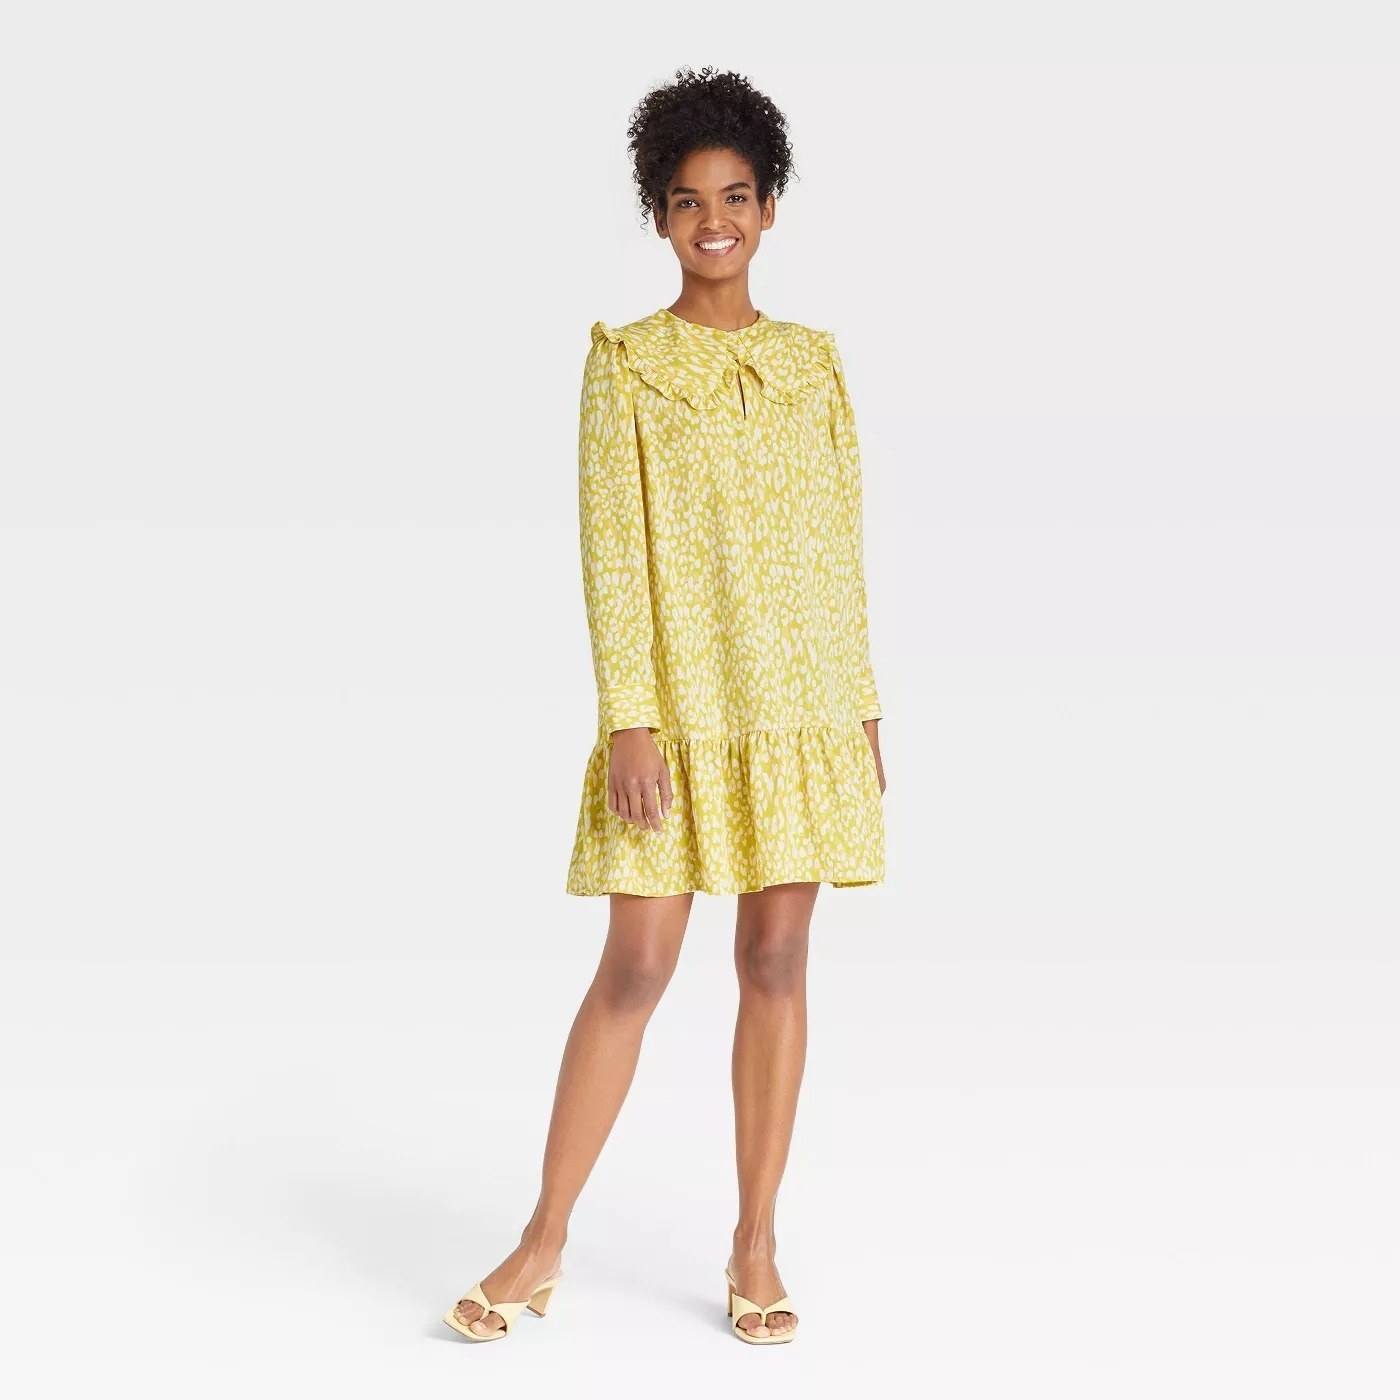 Model wearing yellow patterned dress, stops above the knee